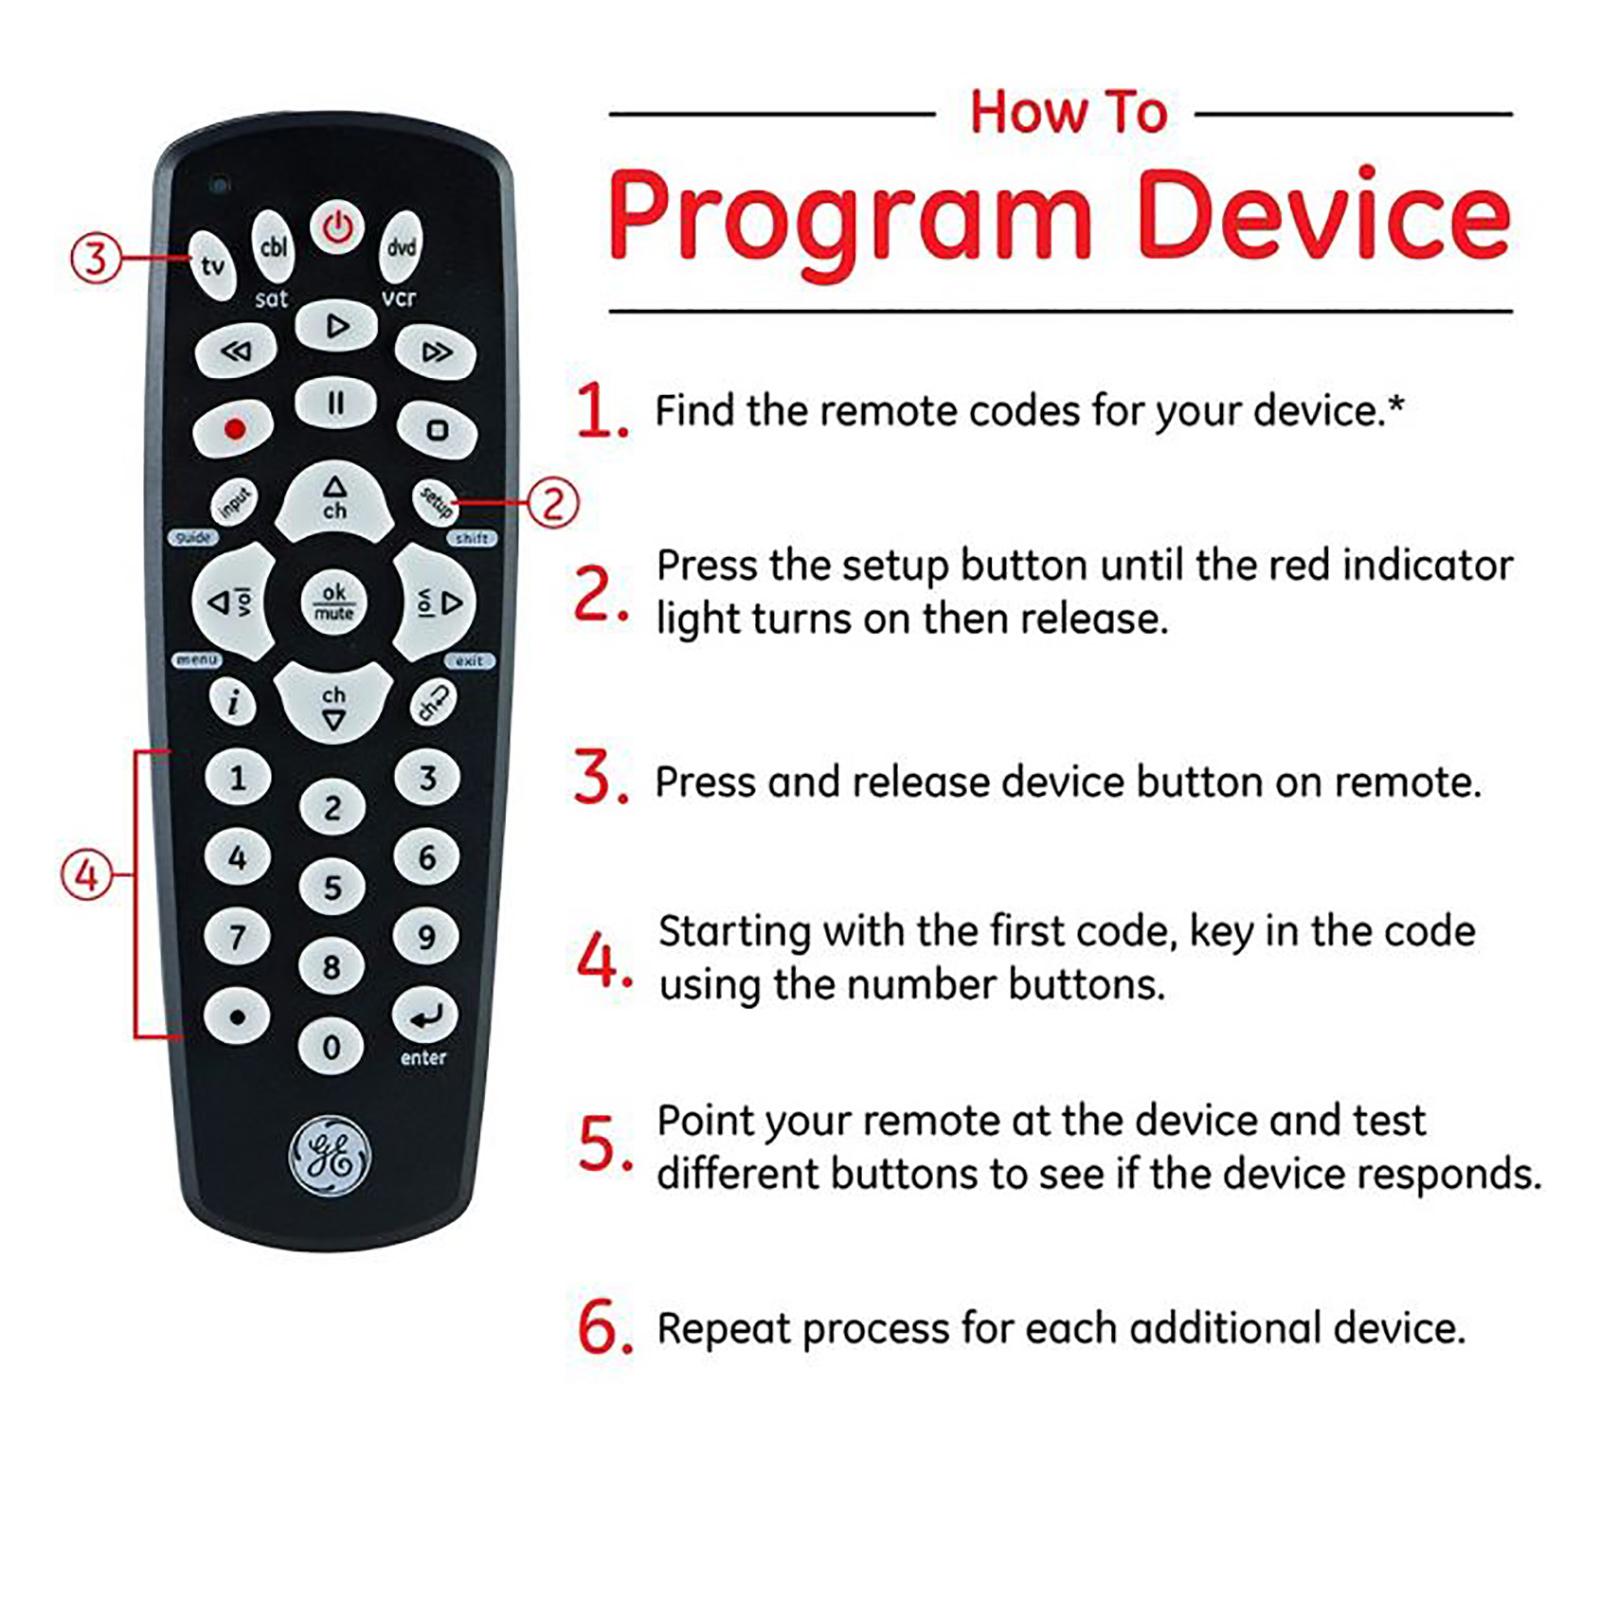 How to Program Your GE Remote for Your Devices